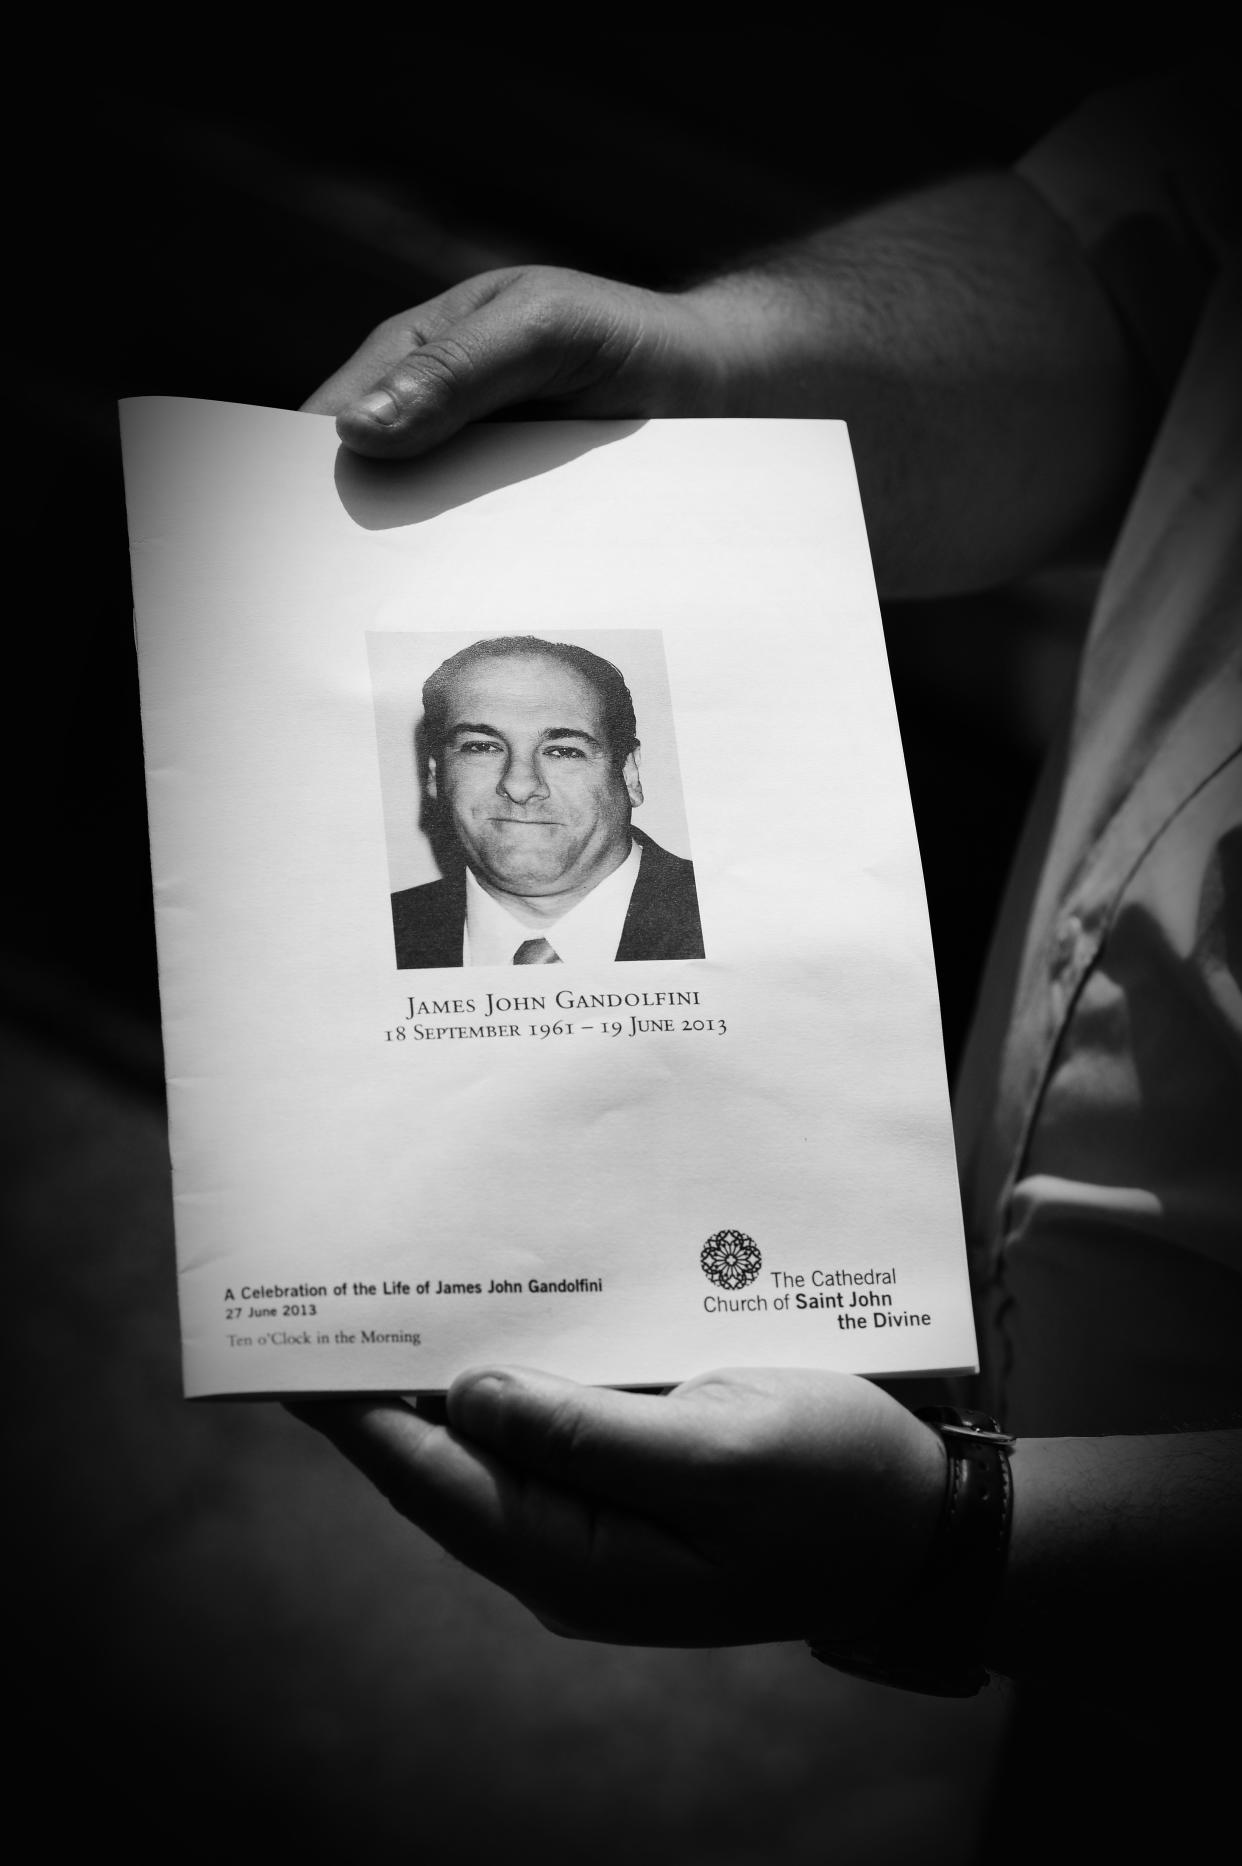 NEW YORK, NY - JUNE 27:  (EDITORS NOTE: Image has been digitally altered.) A view of the program given out at the funeral for actor James Gandolfini at The Cathedral Church of St. John the Divine on June 27, 2013 in New York City. Gandolfini passed away on June 19, 2013 while vacationing in Rome, Italy.  (Photo by Mike Coppola/Getty Images)